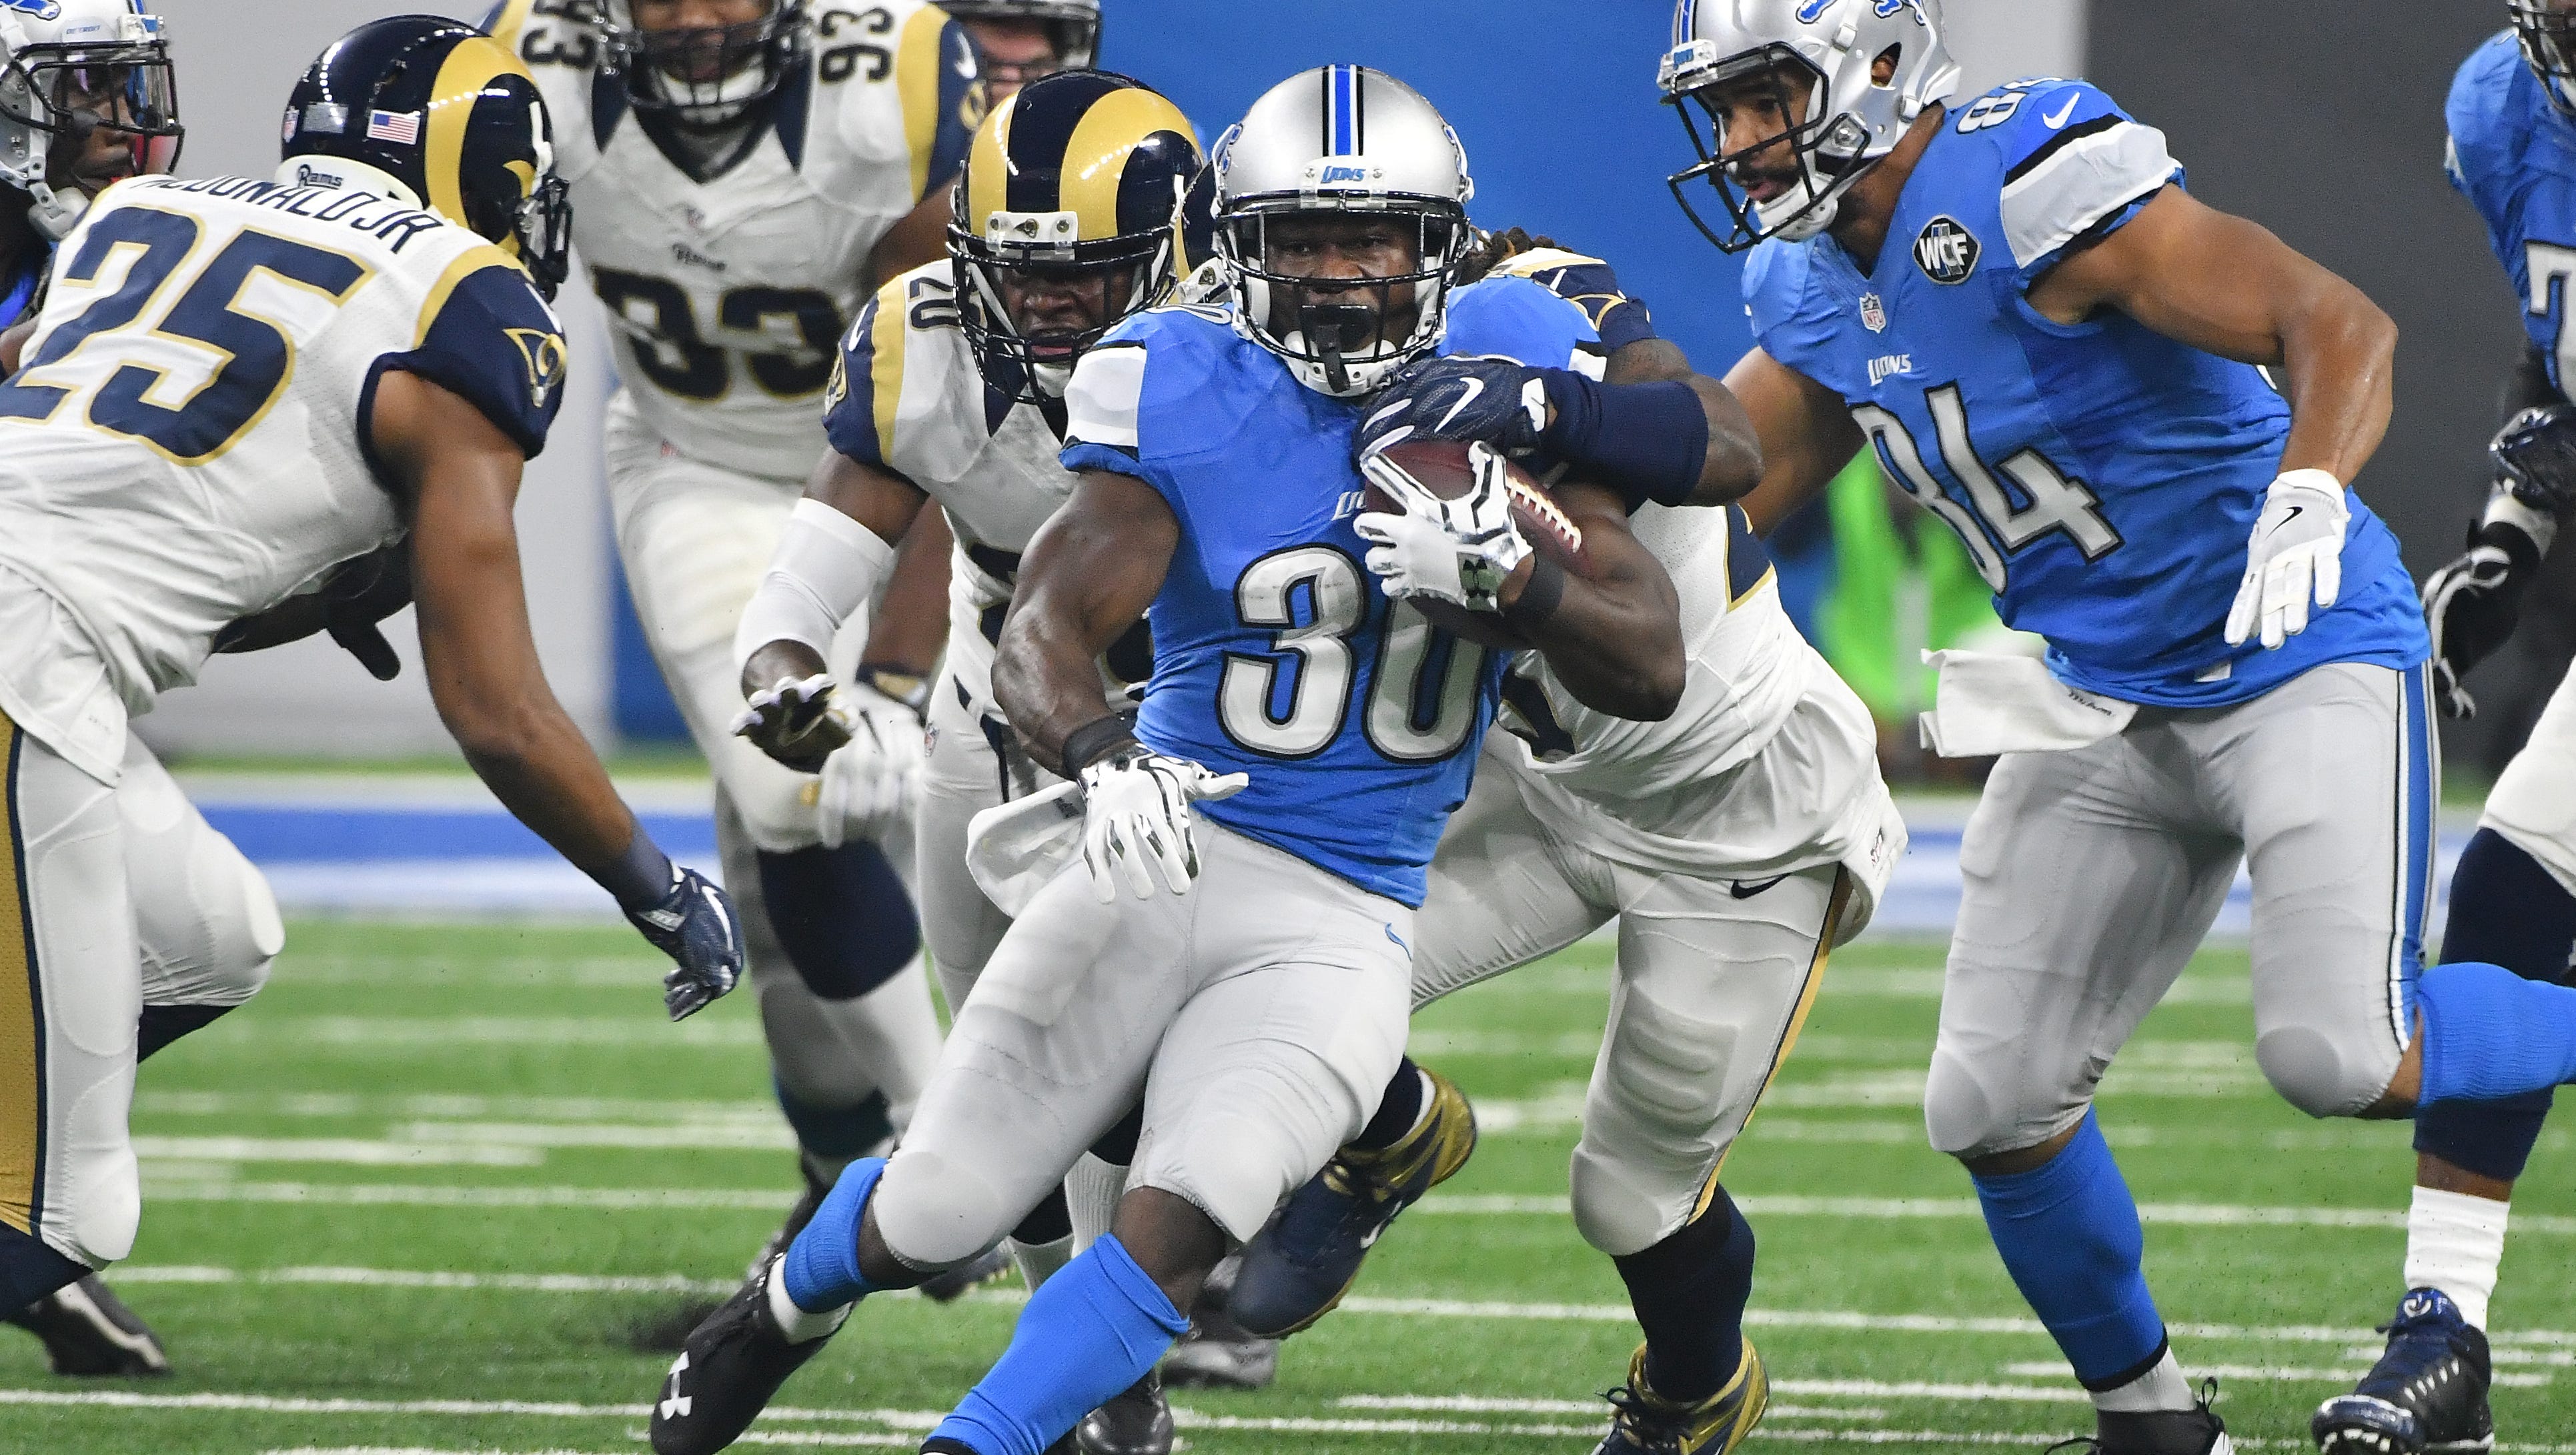 Lions running back Justin Forsett heads up field in the first quarter.